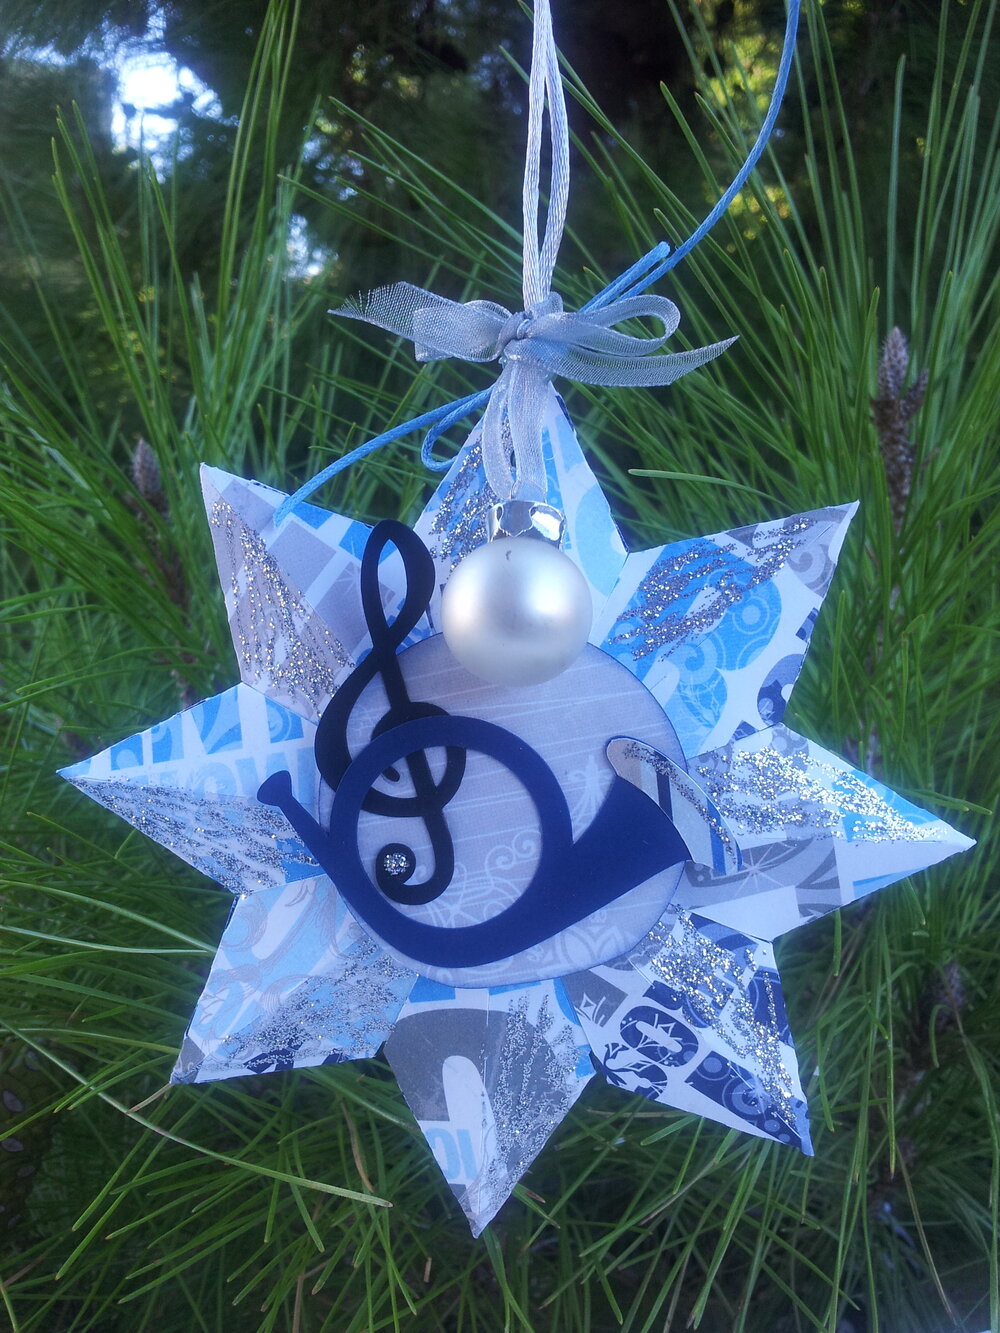 Eight-pointed star 3D ornament